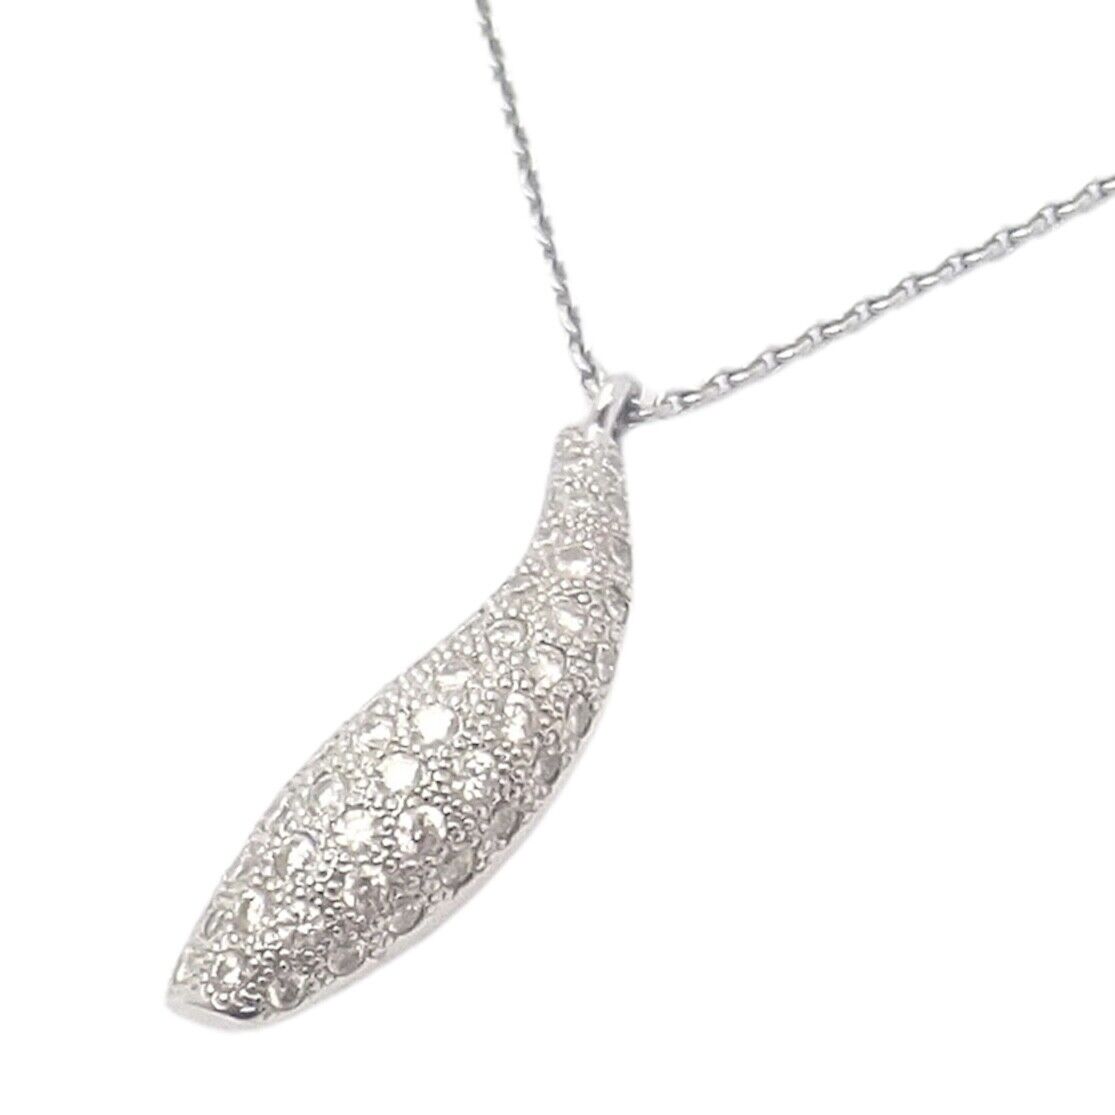 Tiffany & Co. Jewelry & Watches:Fine Jewelry:Necklaces & Pendants Authentic! Tiffany & Co 18k White Gold Frank Gehry Diamond Fish Necklace